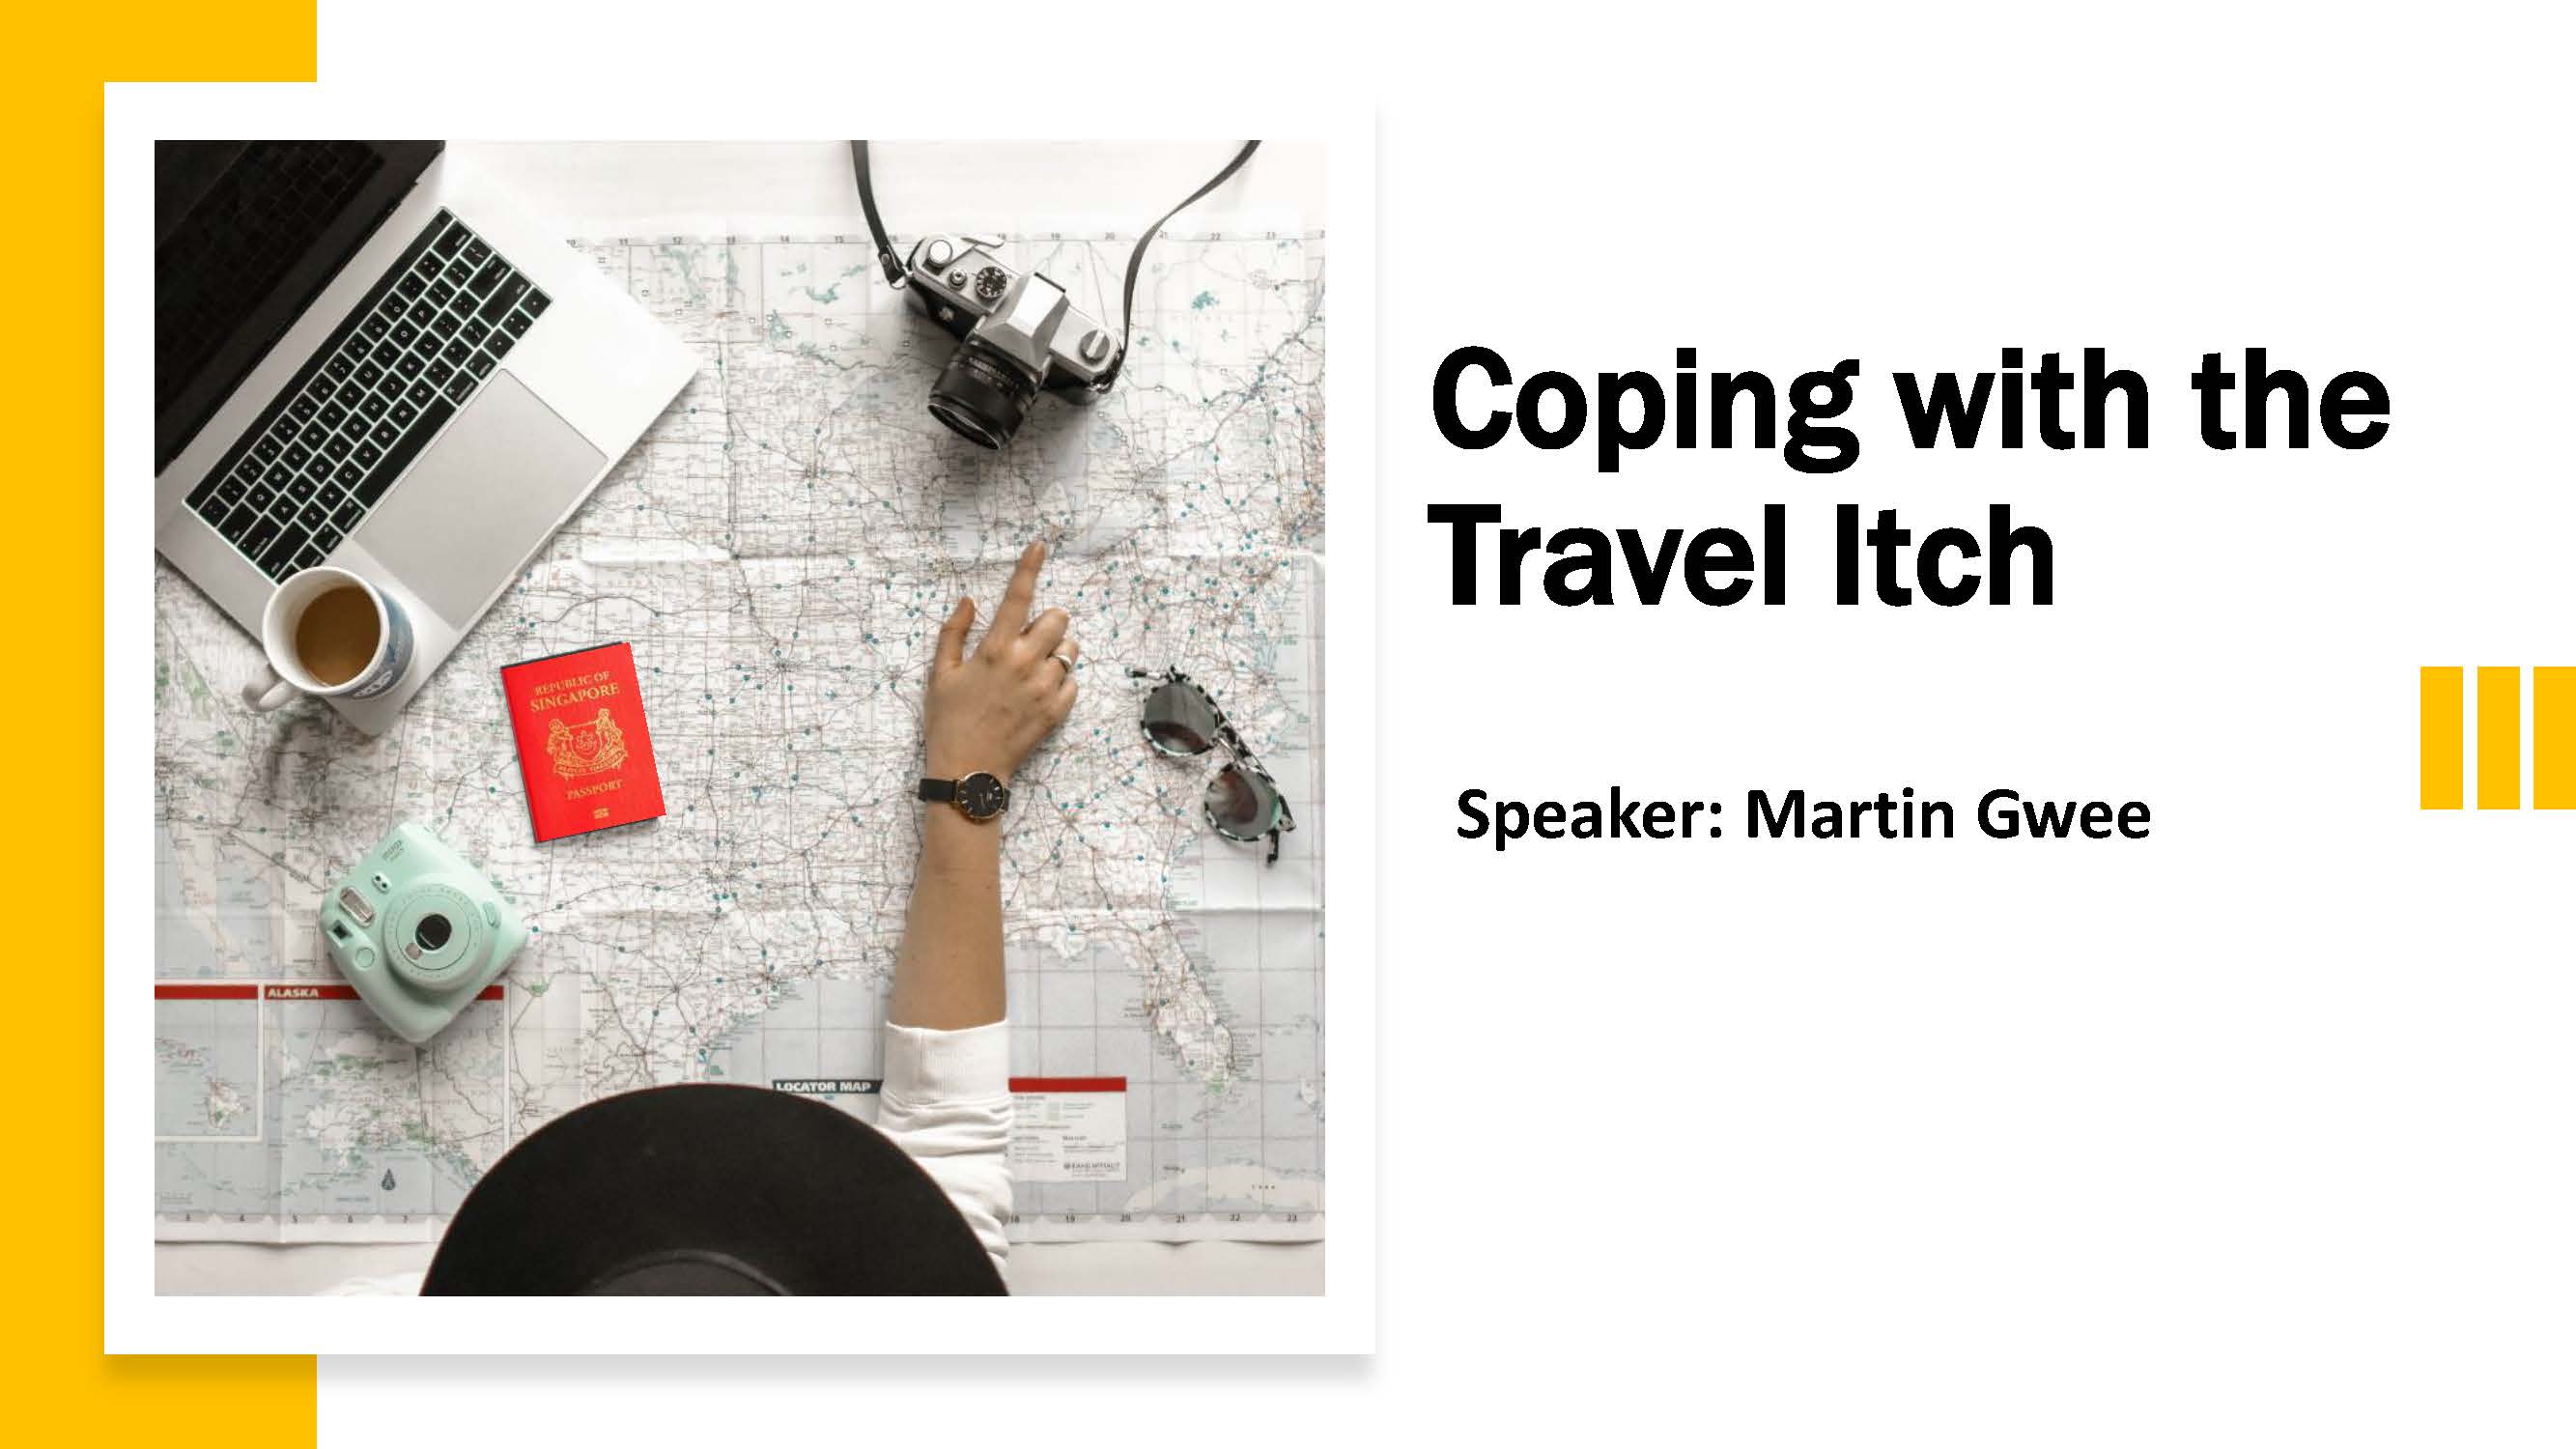 Coping with Travel Itch